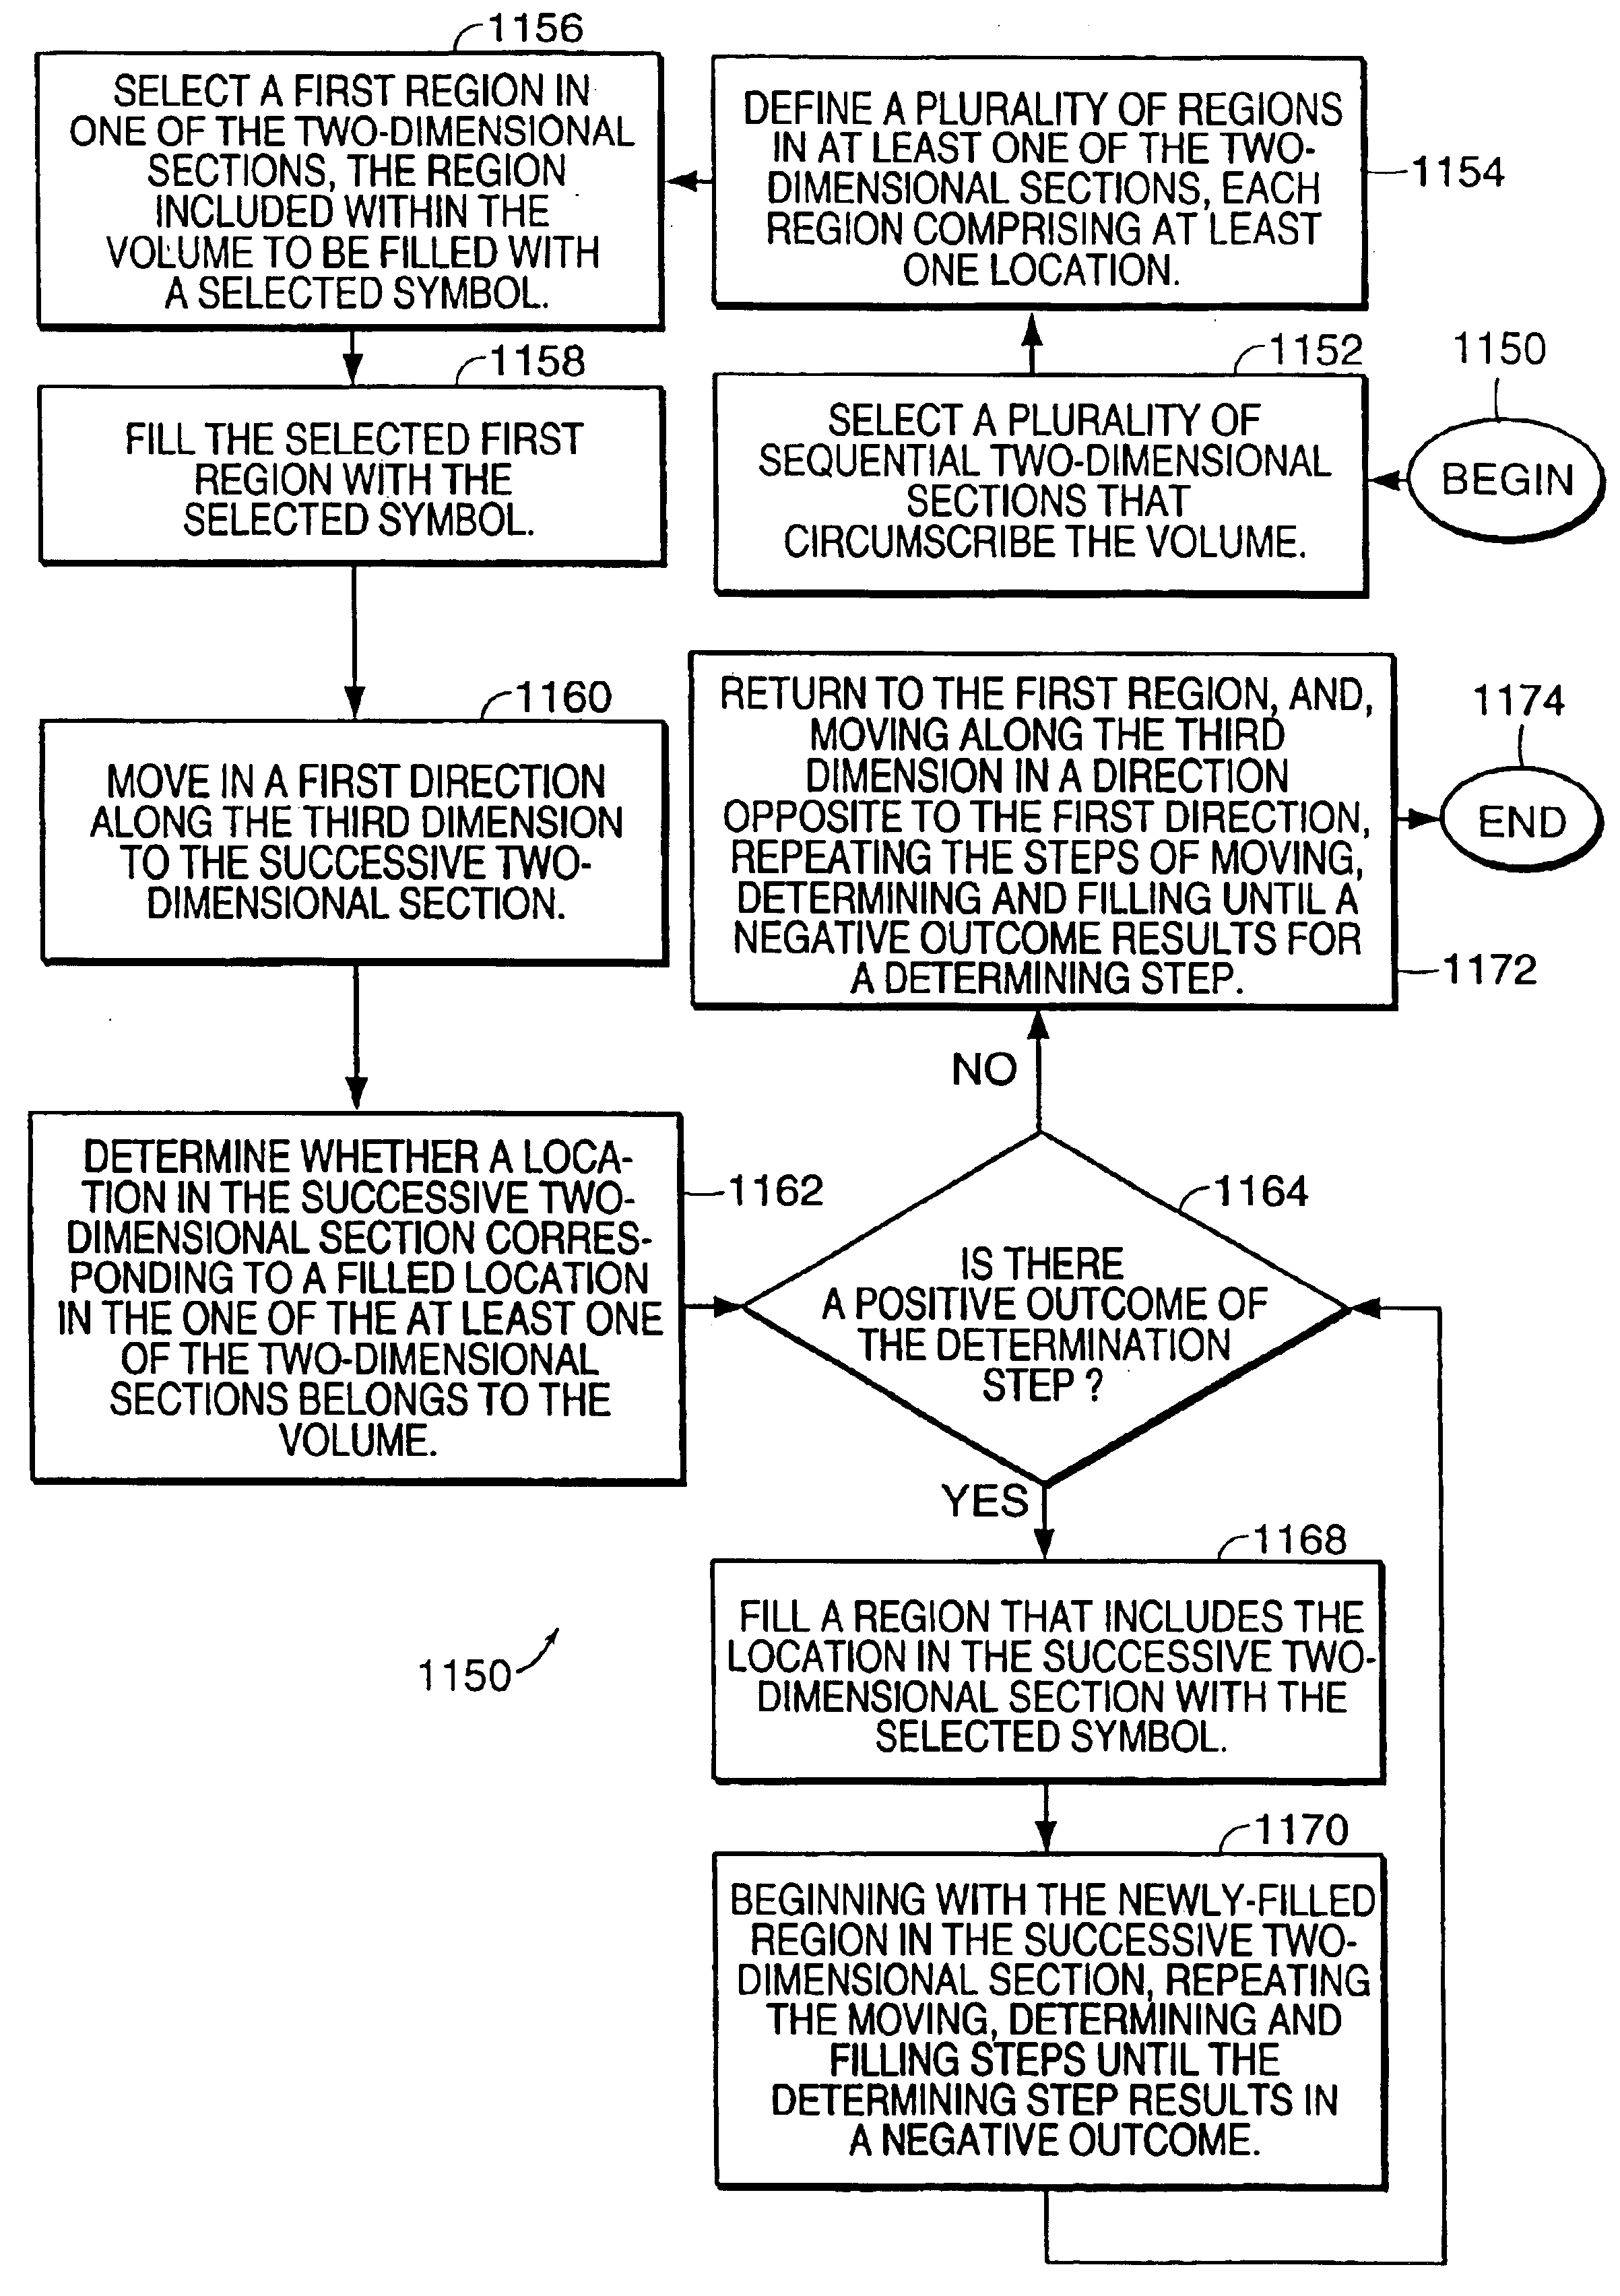 Methods for outlining and filling regions in multi-dimensional arrays